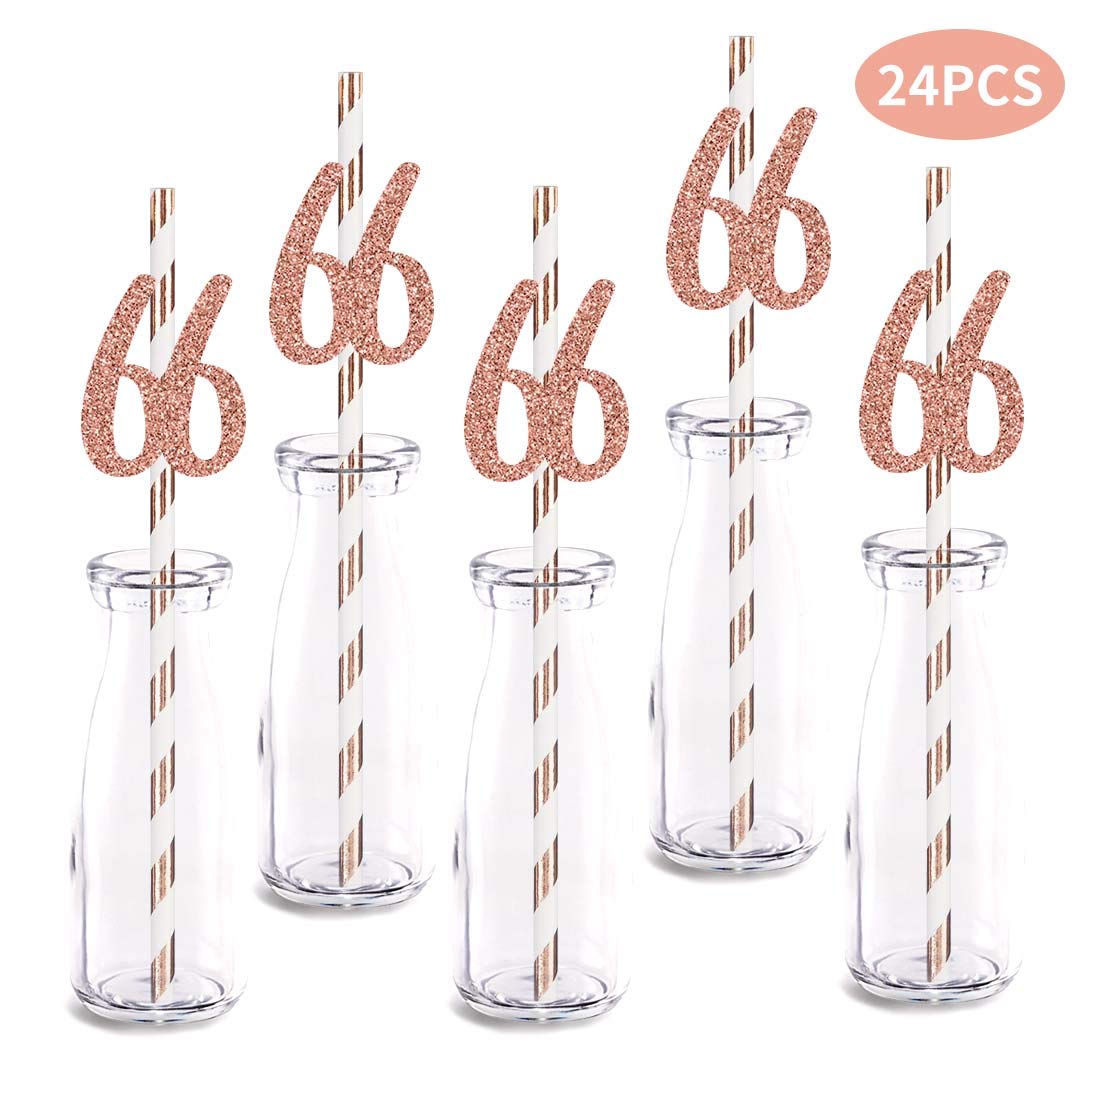 Rose Happy 66th Birthday Straw Decor, Rose Gold Glitter 24pcs Cut-Out Number 66 Party Drinking Decorative Straws, Supplies